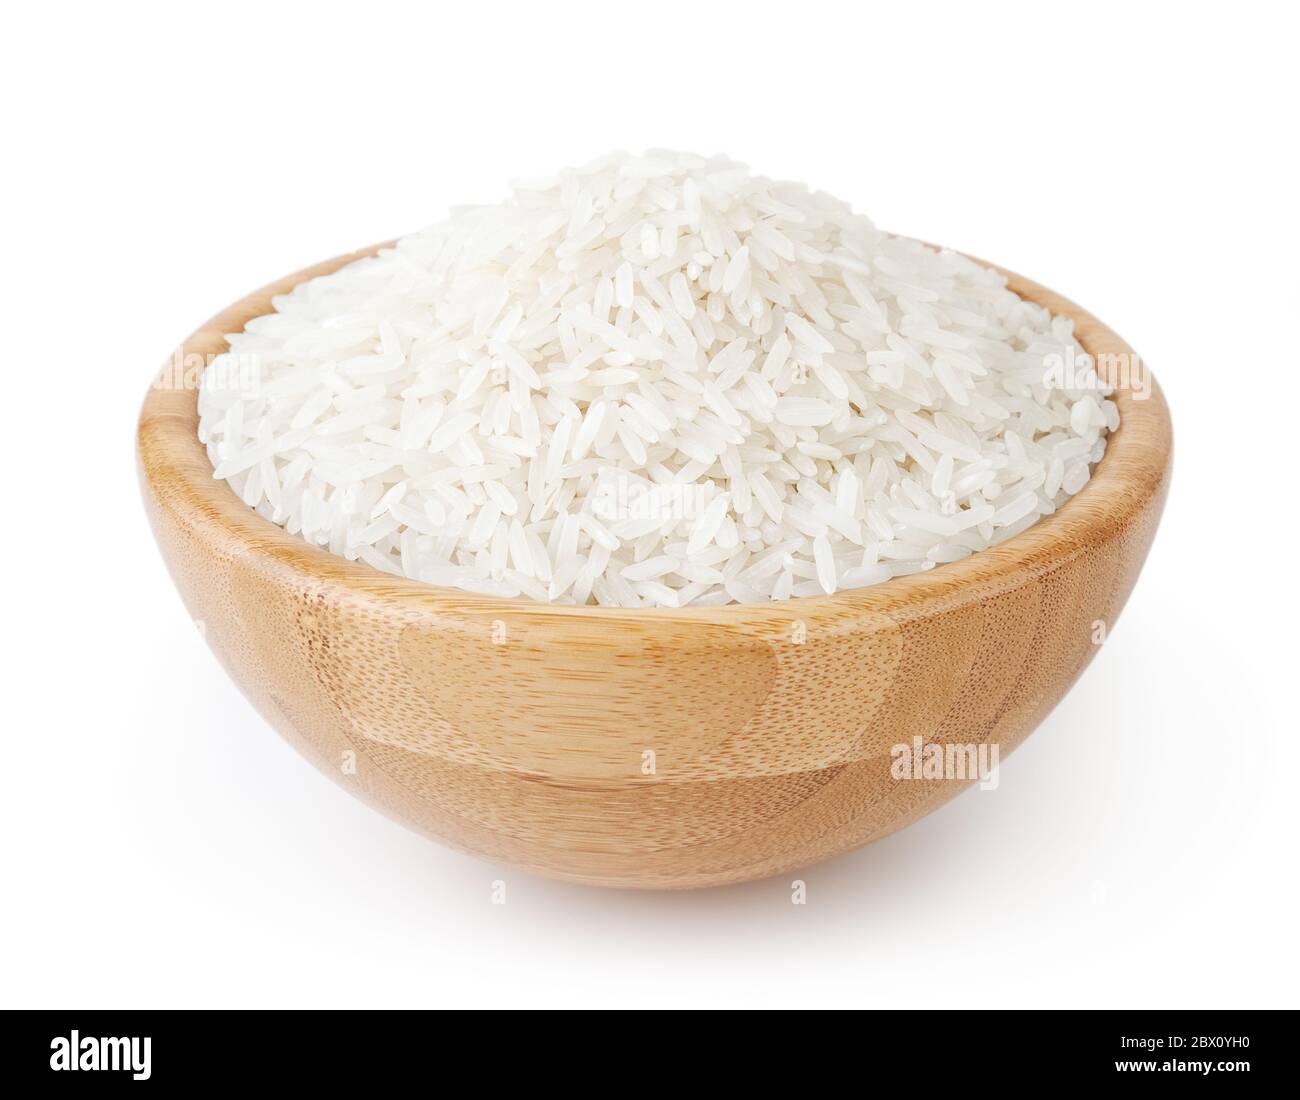 White long-grain rice in wooden bowl isolated on white background Stock Photo